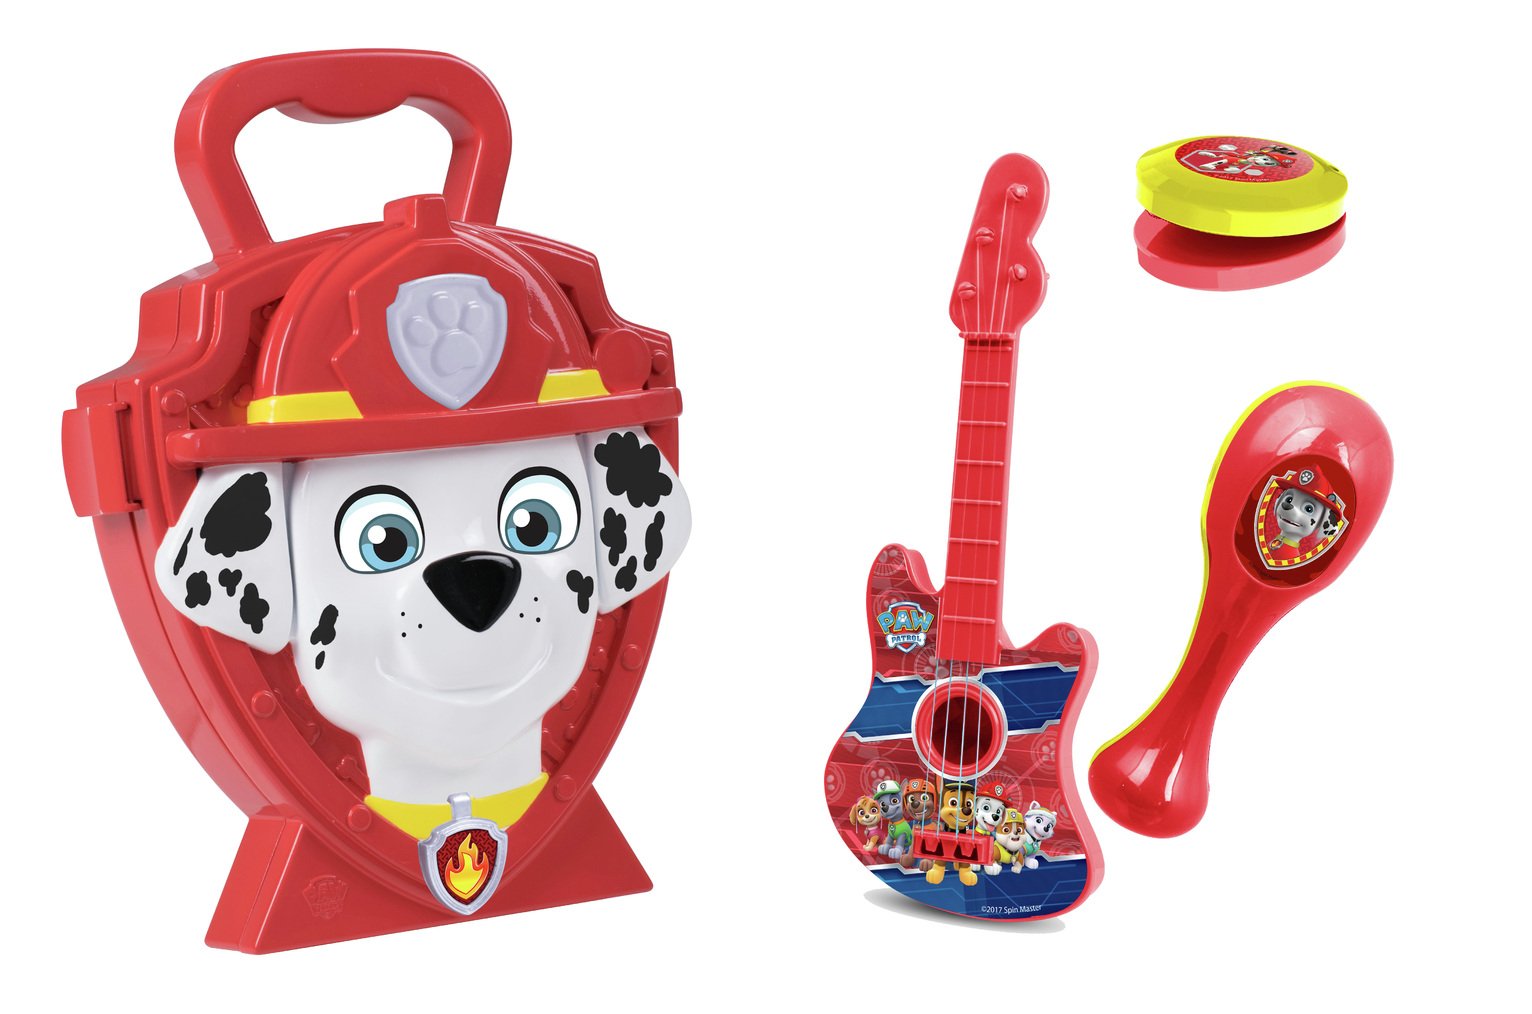 PAW Patrol Marshall Case Review